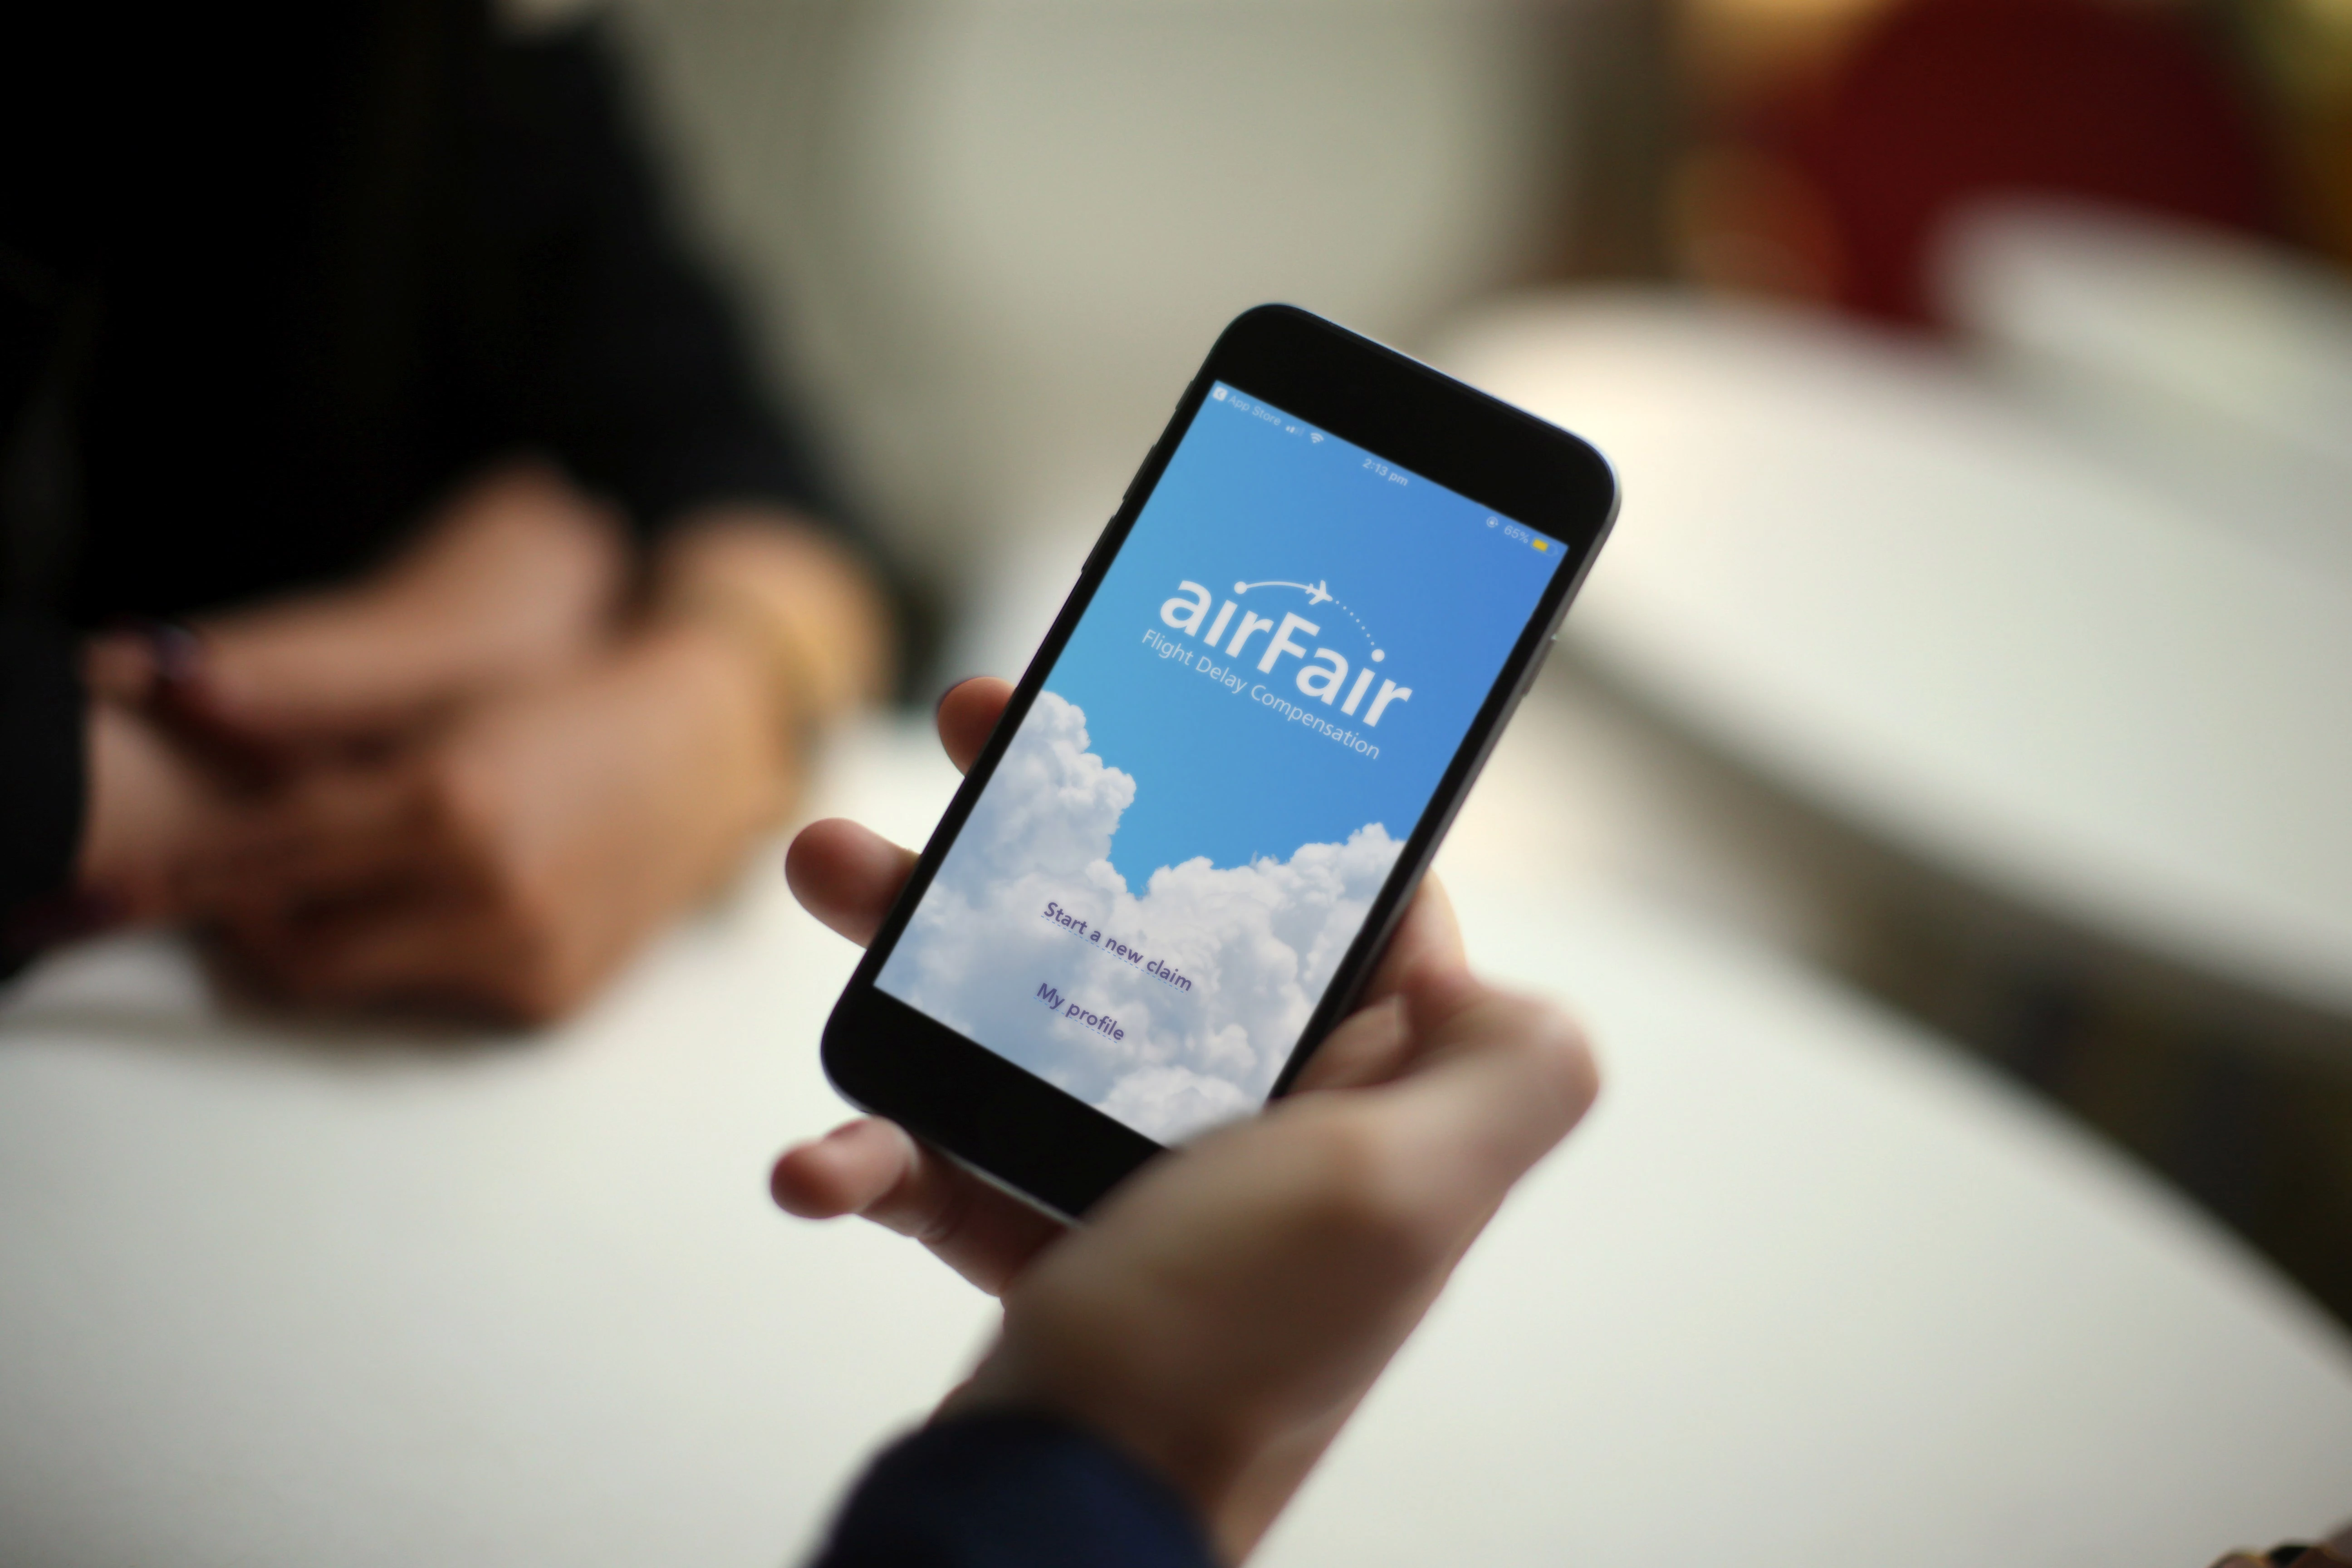 airFair’s app was launched in October 2016